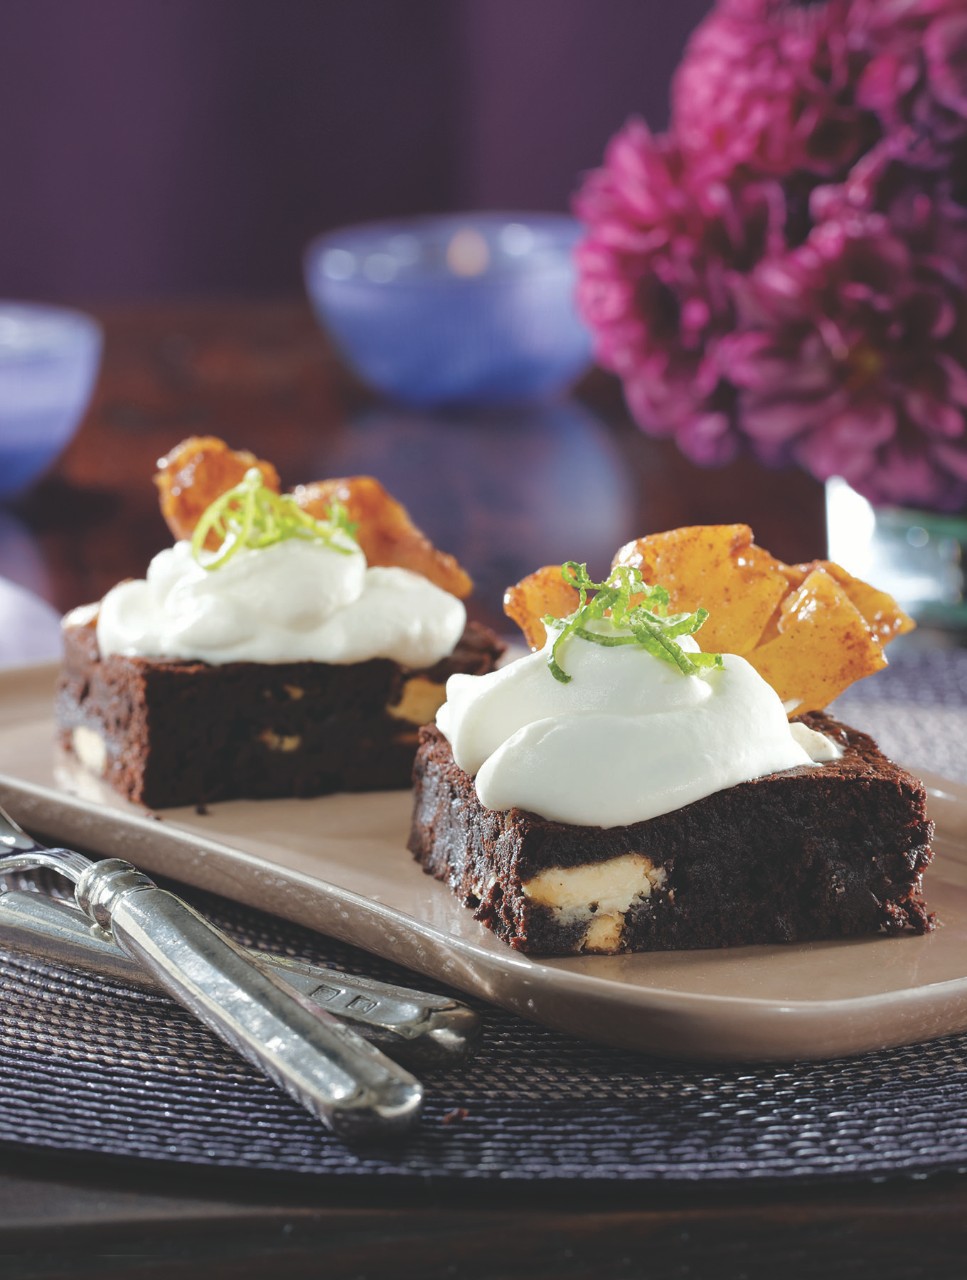 Triple Chocolate Brownies with Caramelized Pineapple